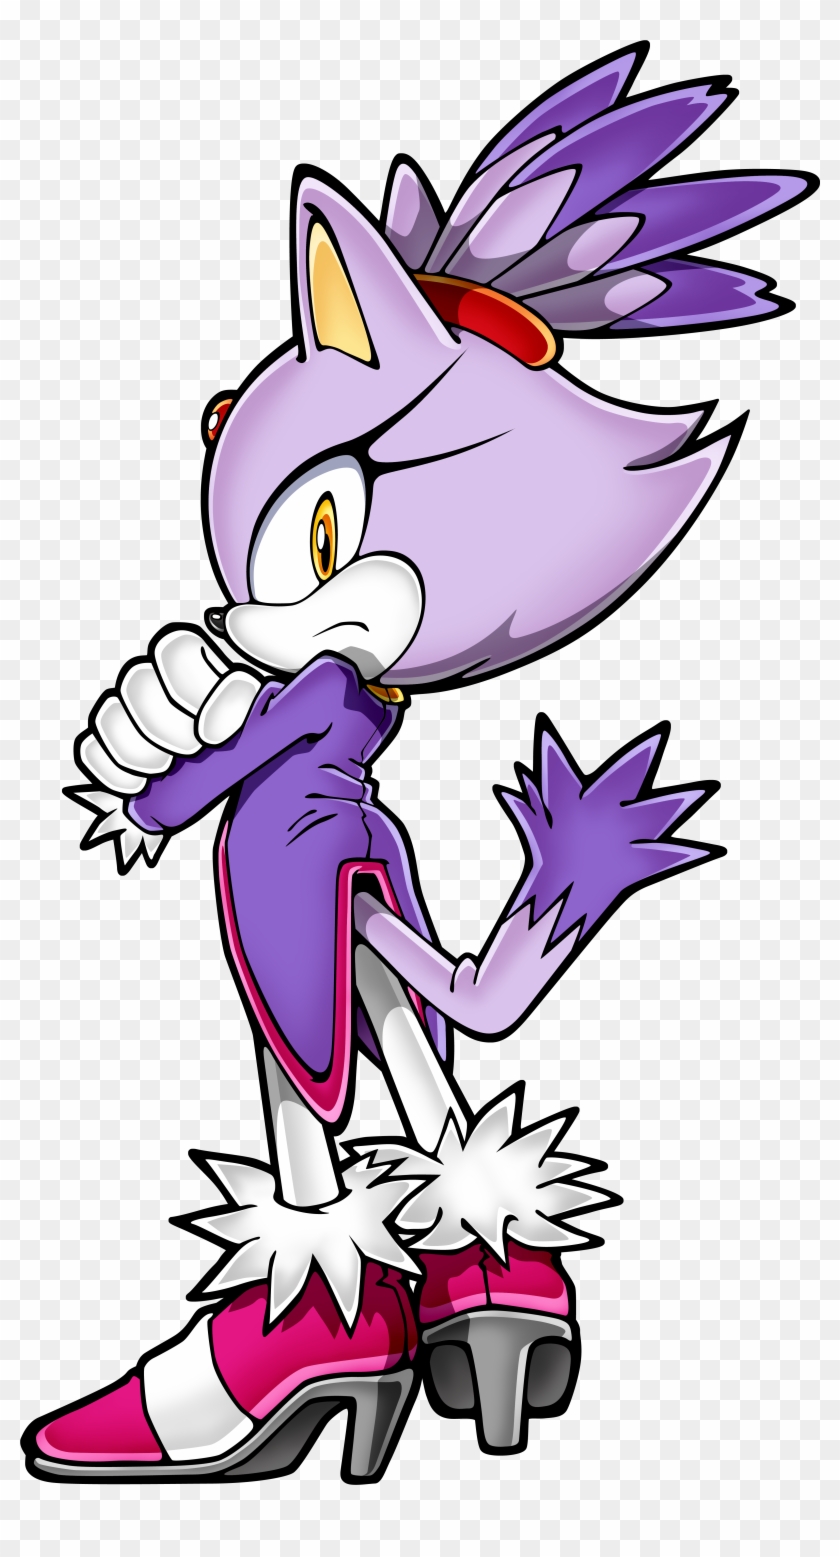 Blaze sonic and Need to